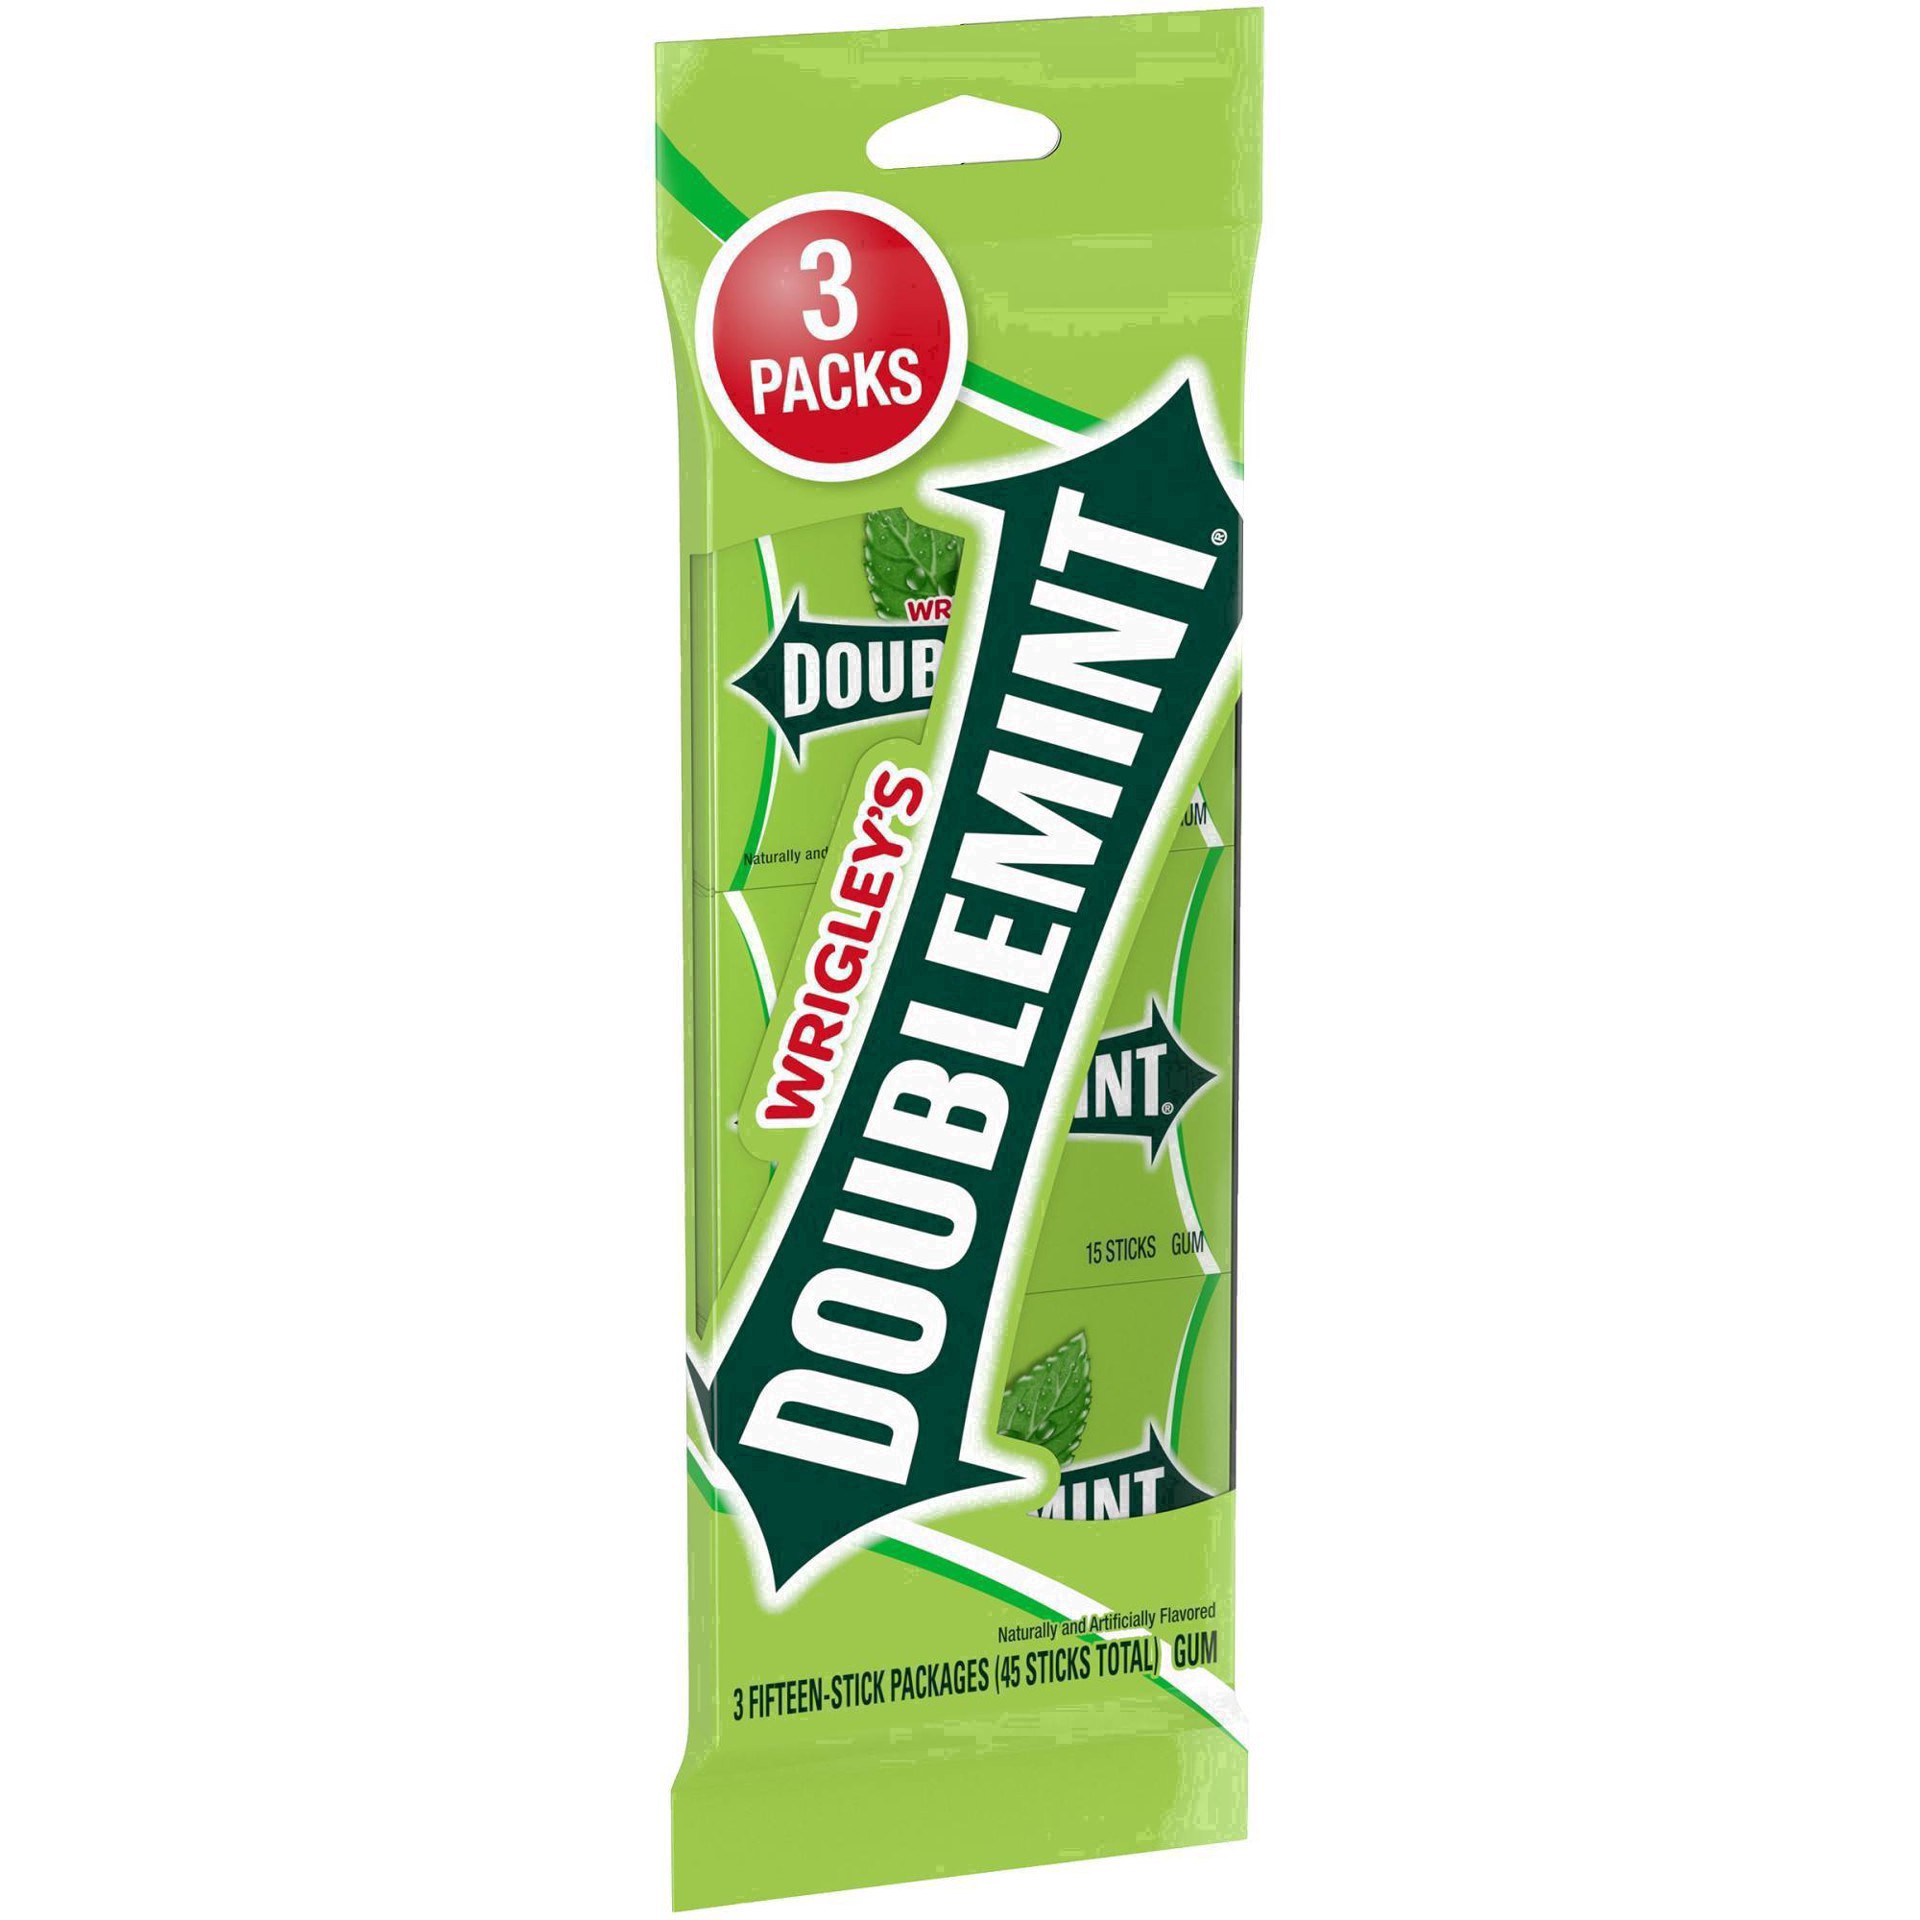 slide 9 of 134, Doublemint WRIGLEY'S DOUBLEMINT Bulk Chewing Gum, Value Pack, 15 ct (3 Pack), 45 ct